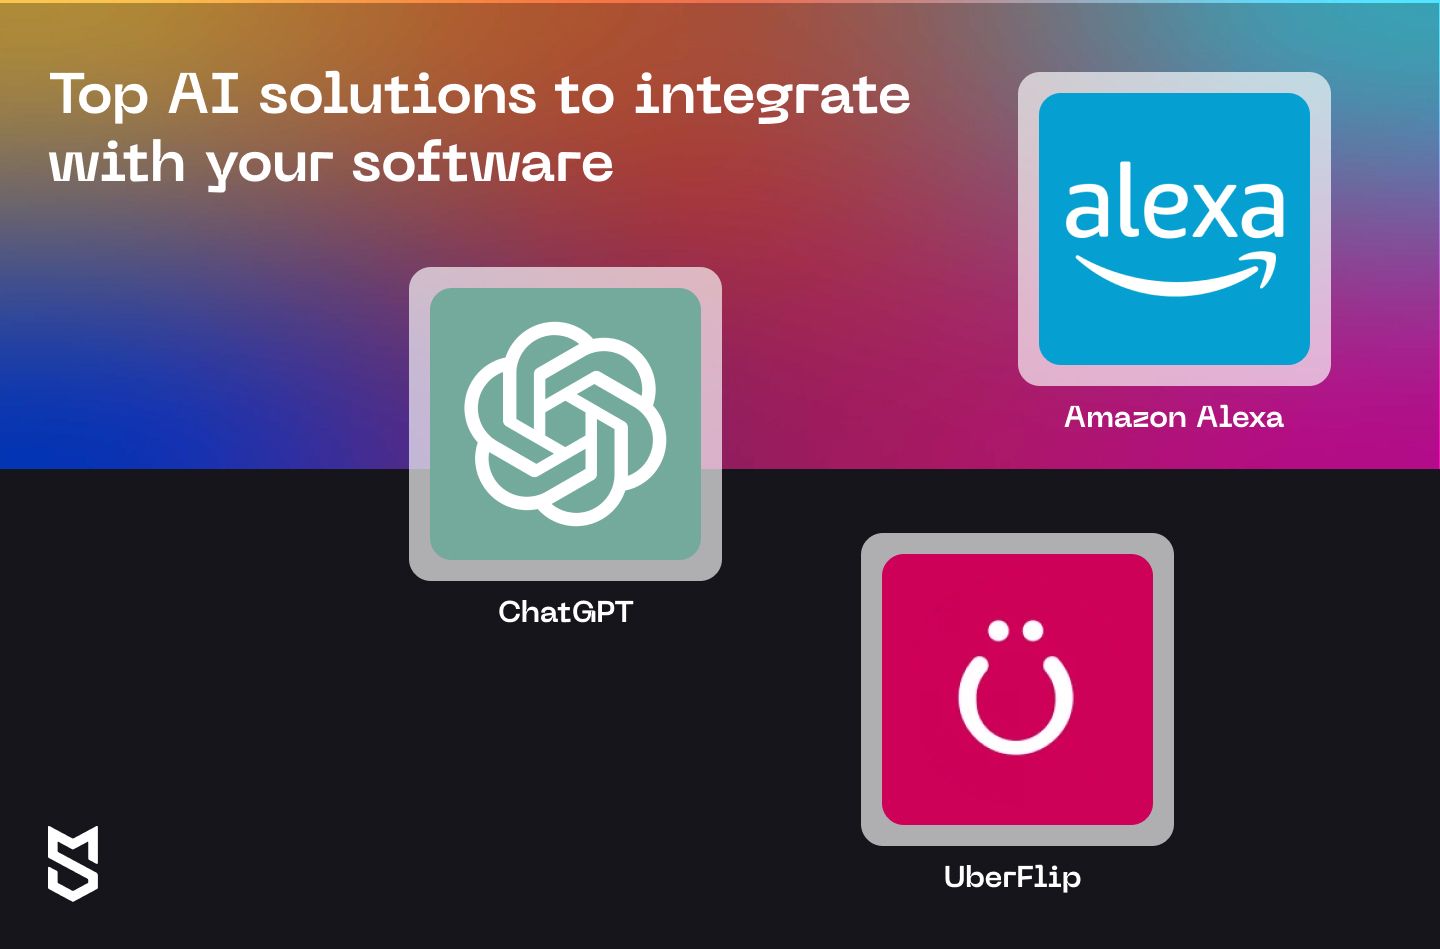 Top AI solutions to integrate with your software